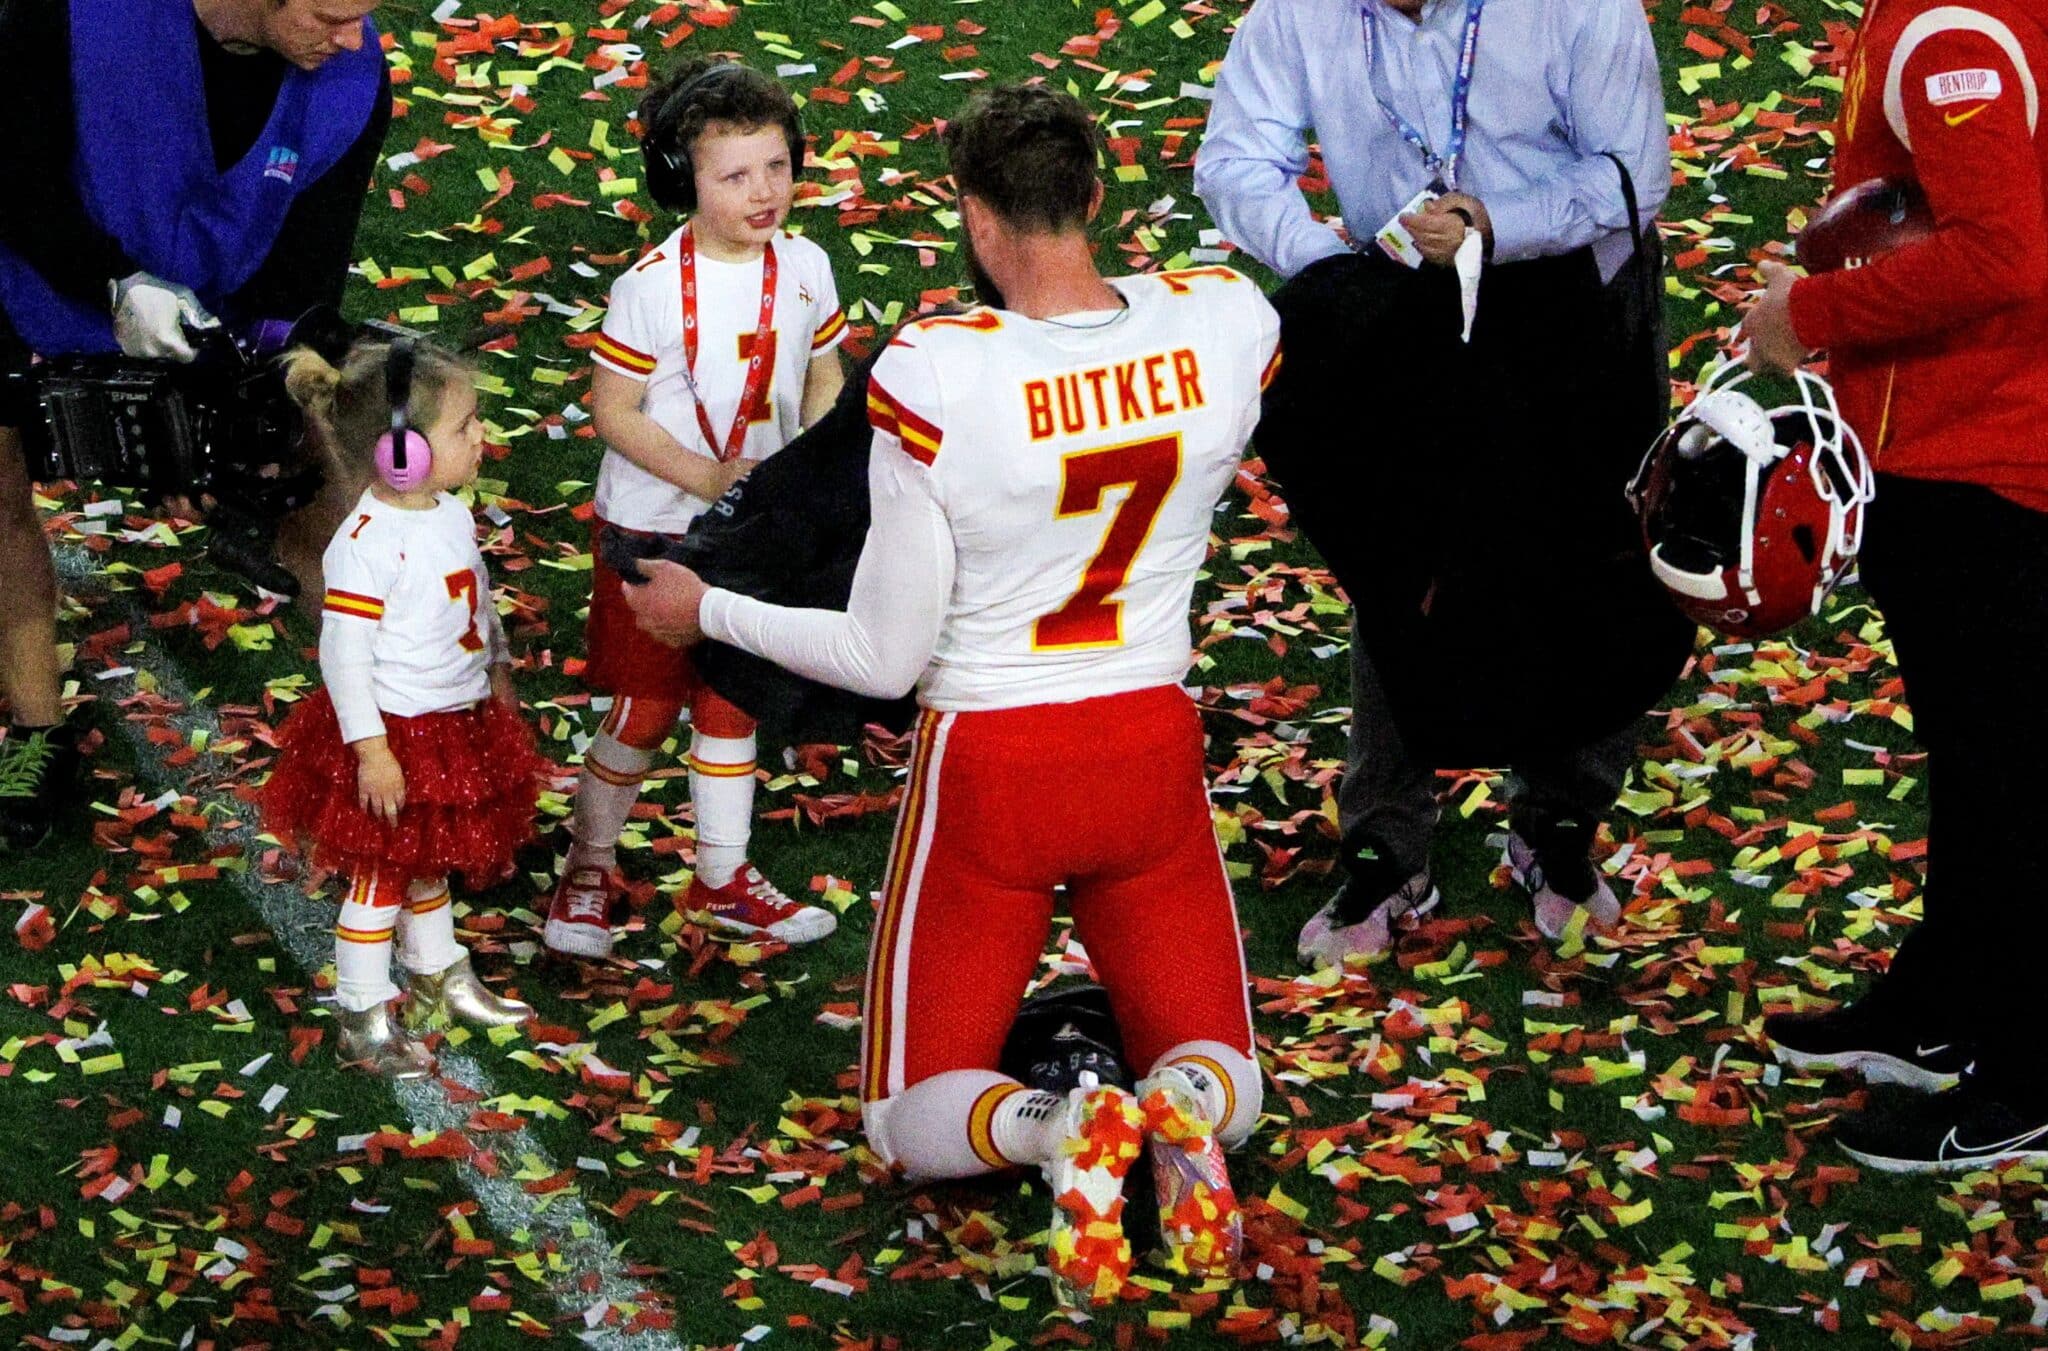 Kansas City Chiefs' Harrison Butker celebrates winning Super Bowl LVII with his children in Glendale, Ariz., Feb. 12, 2023. In a May 11 commencement address at Benedictine College in Atchison, Kan., Butker told graduates, "There is nothing good about playing God with having children -- whether that be your ideal number or the perfect time to conceive. No matter how you spin it, there is nothing natural about Catholic birth control." (OSV News photo/Caitlin O'Hara, Reuters)